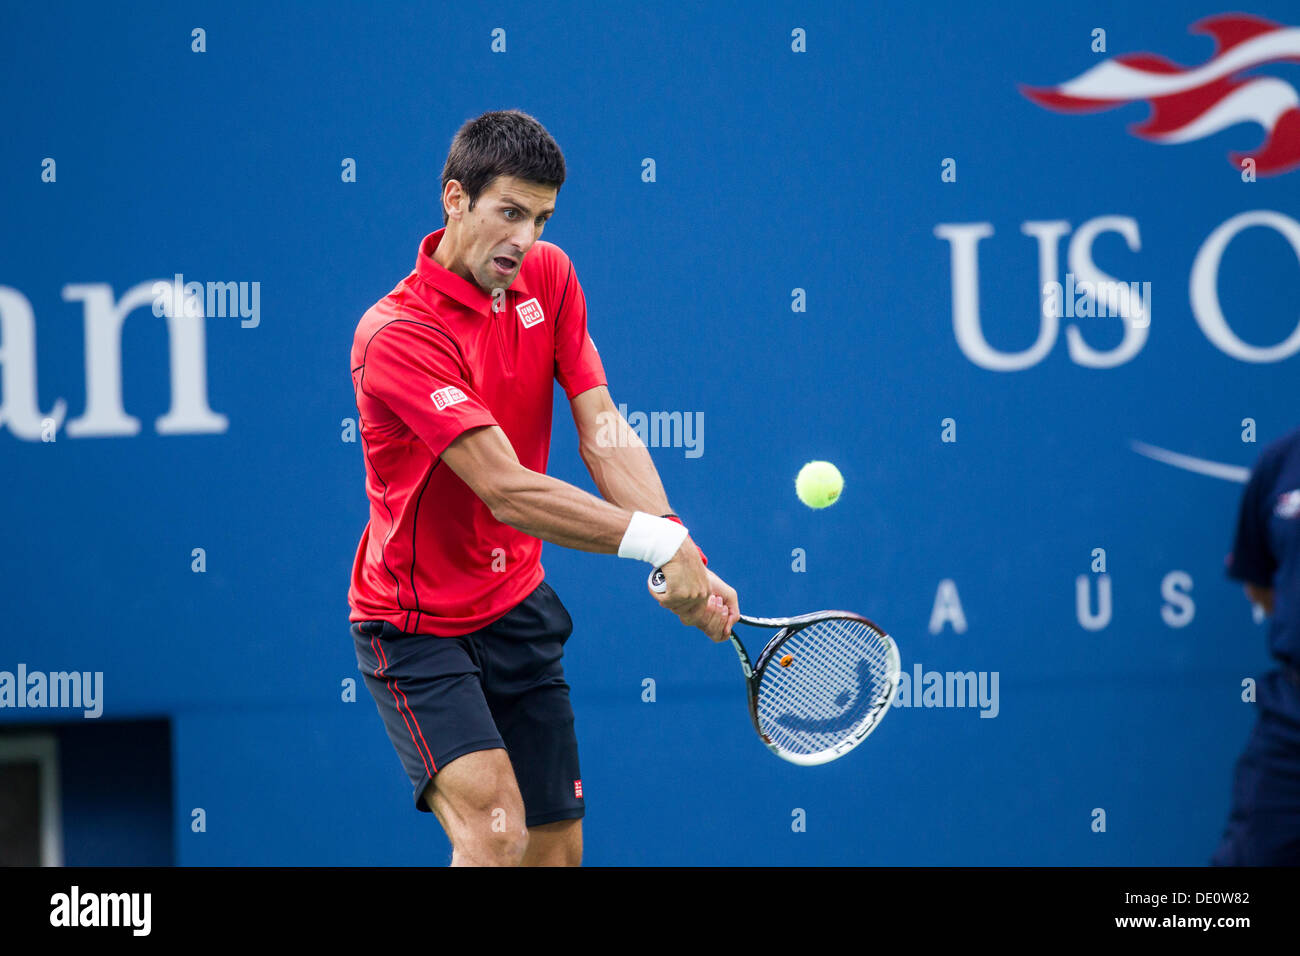 Flushing Meadows-Corona Park, Queens, New York, September 09, 2013 Novak Djokovic (SRB) competing in the finals at the 2013 US Open Tennis Championships Credit:  PCN Photography/Alamy Live News Stock Photo